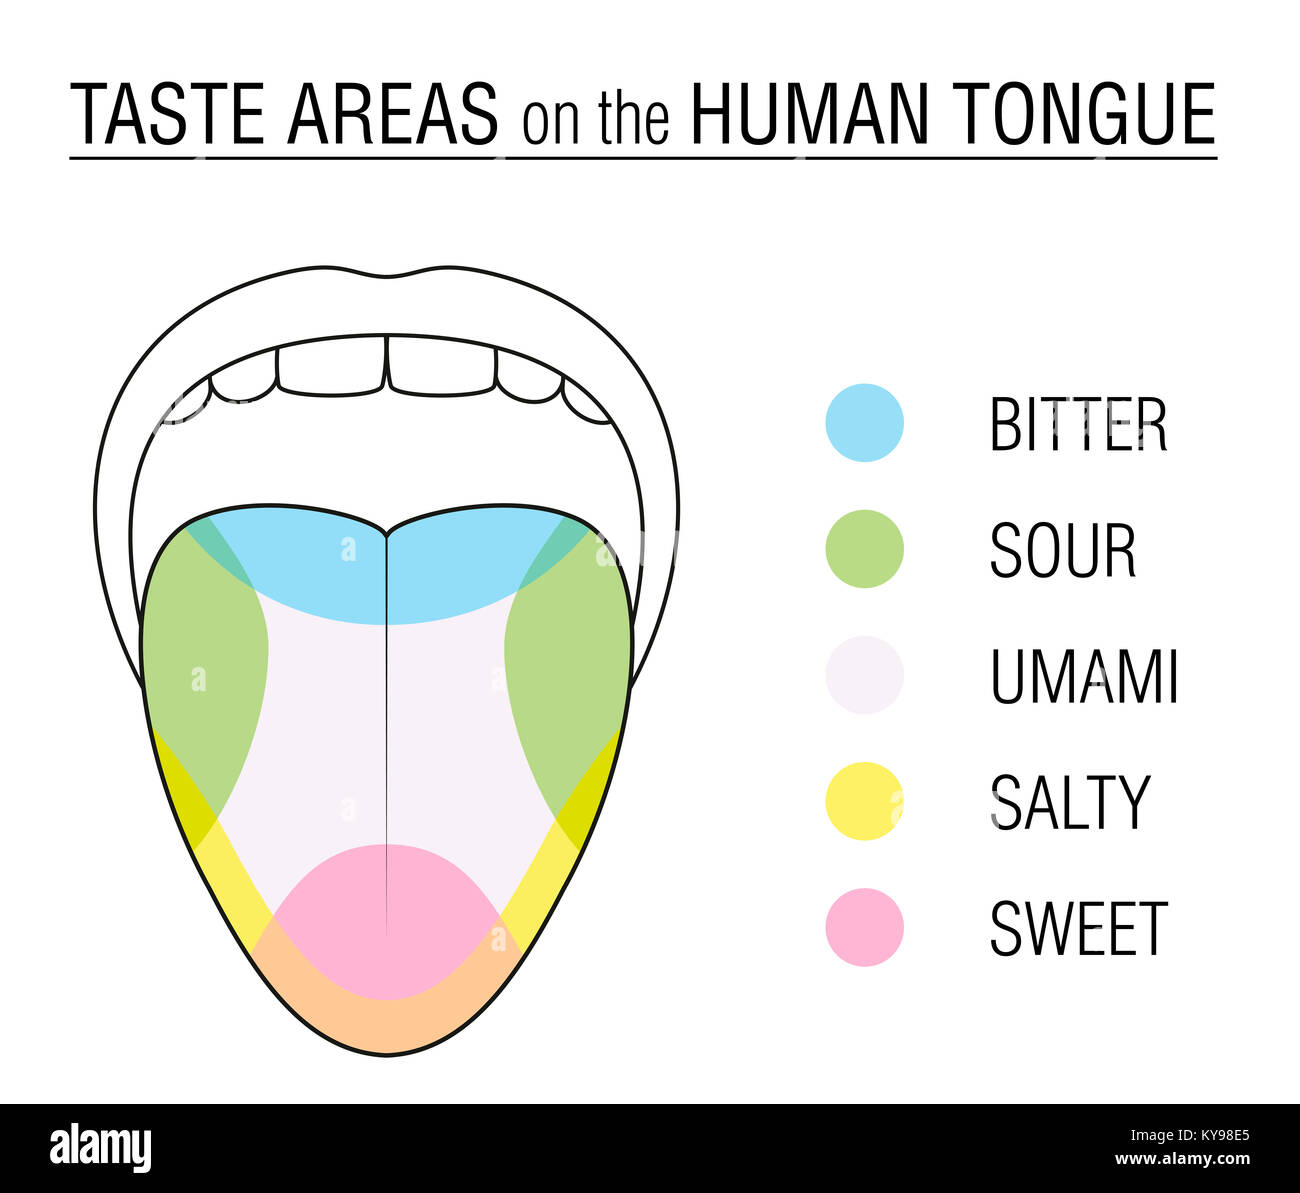 Taste areas of the human tongue - colored division with zones of taste buds for bitter, sour, sweet, salty and umami perception. Stock Photo